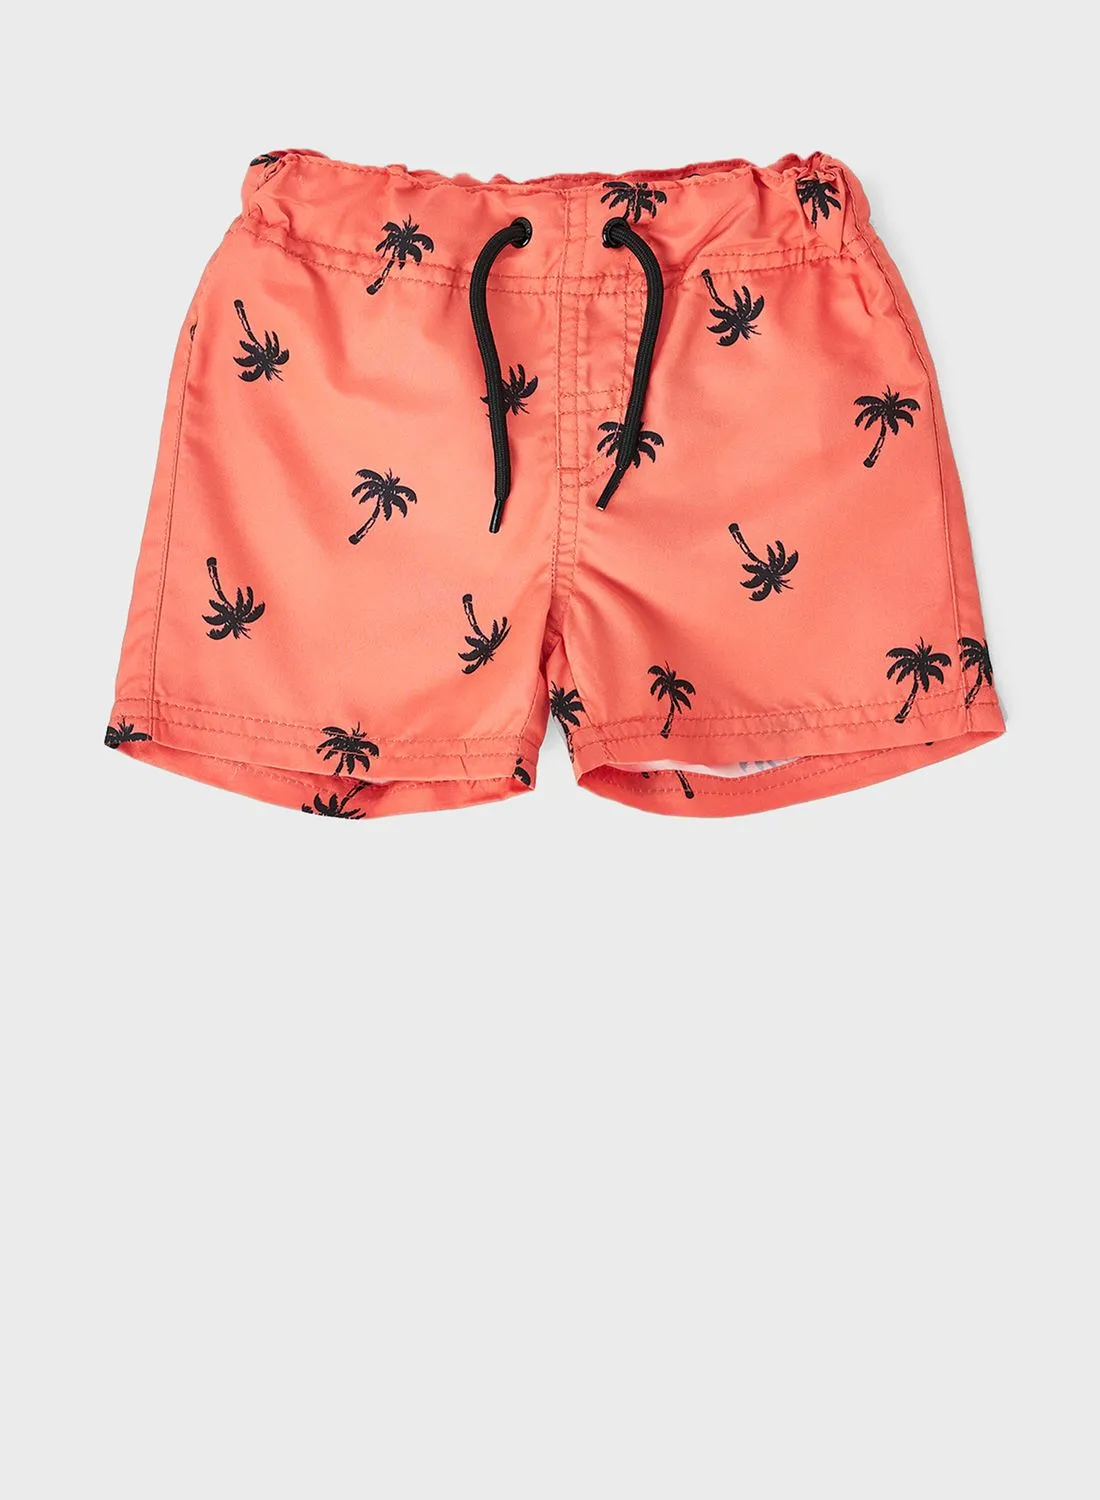 NAME IT Kids All-Over Print Shorts